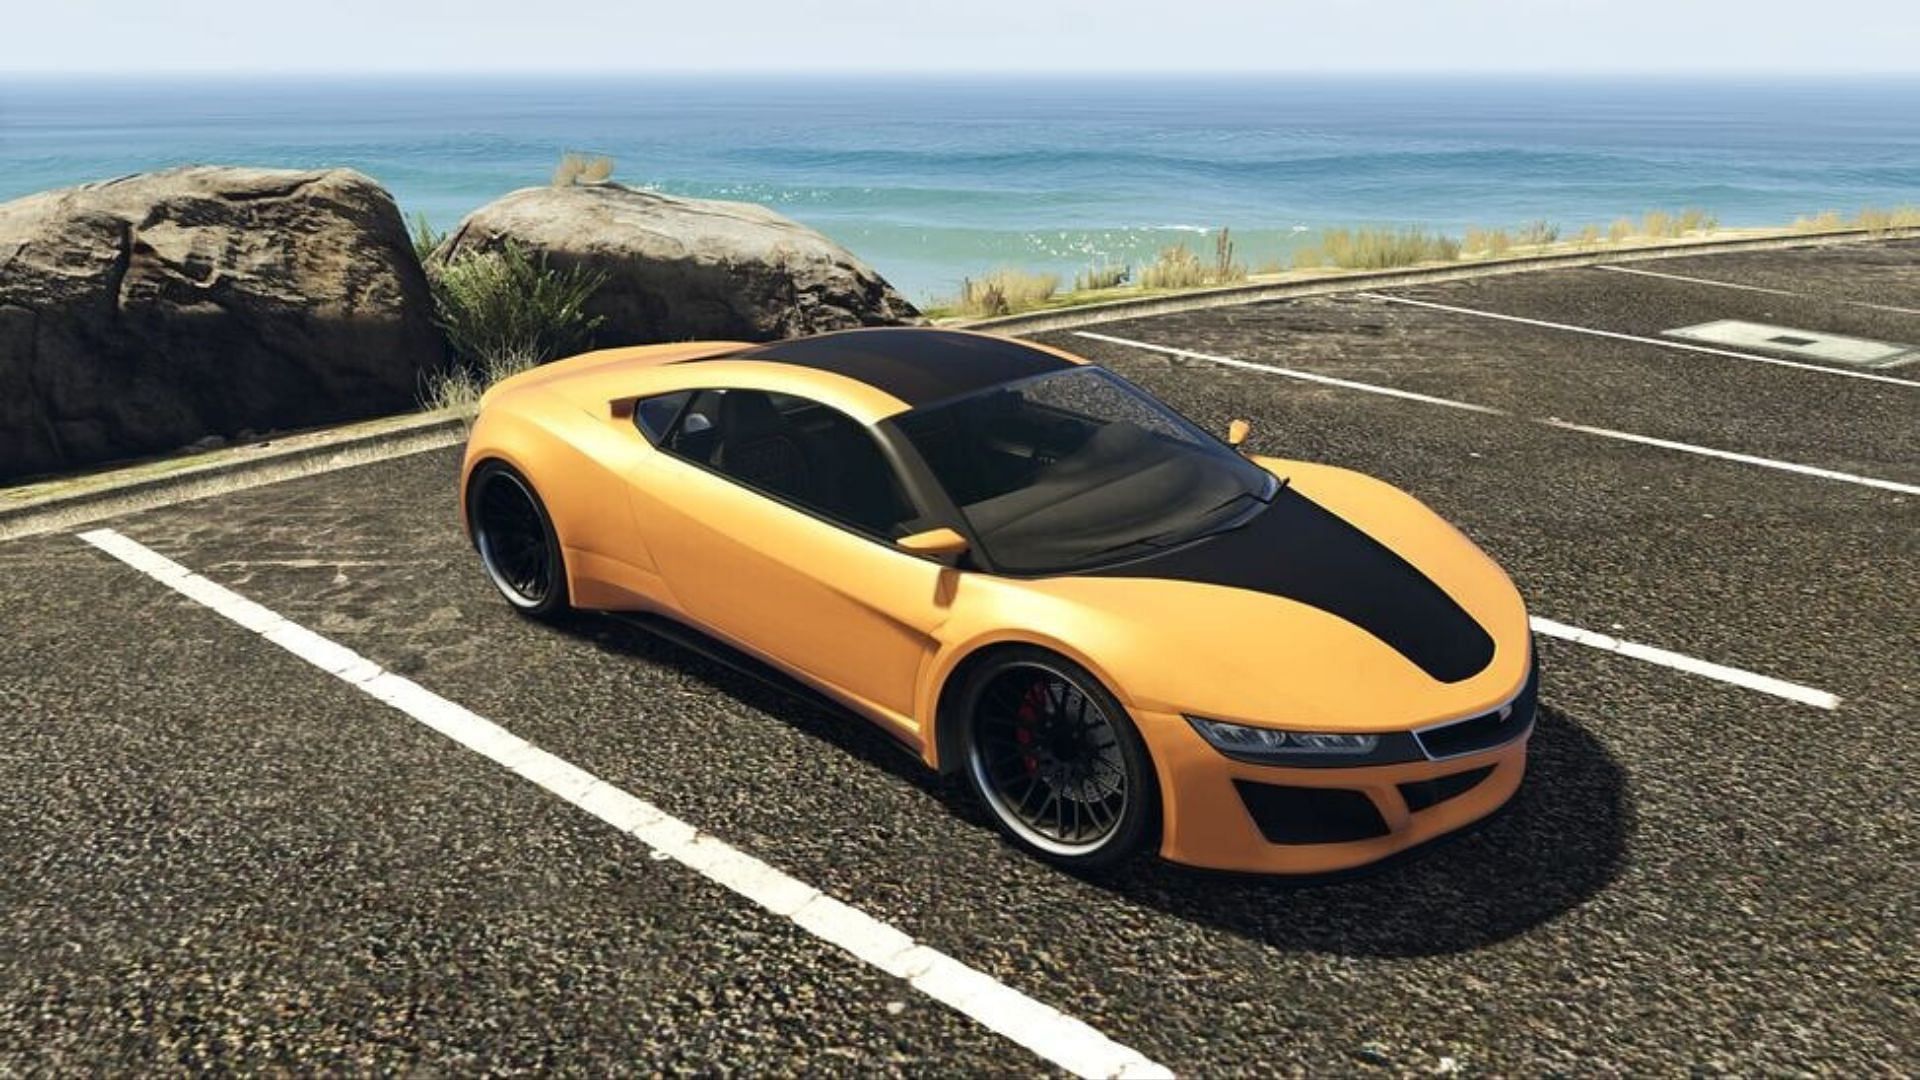 Dinka Jester is one of the oldest vehicles in GTA Online (Image via Rockstar Games)